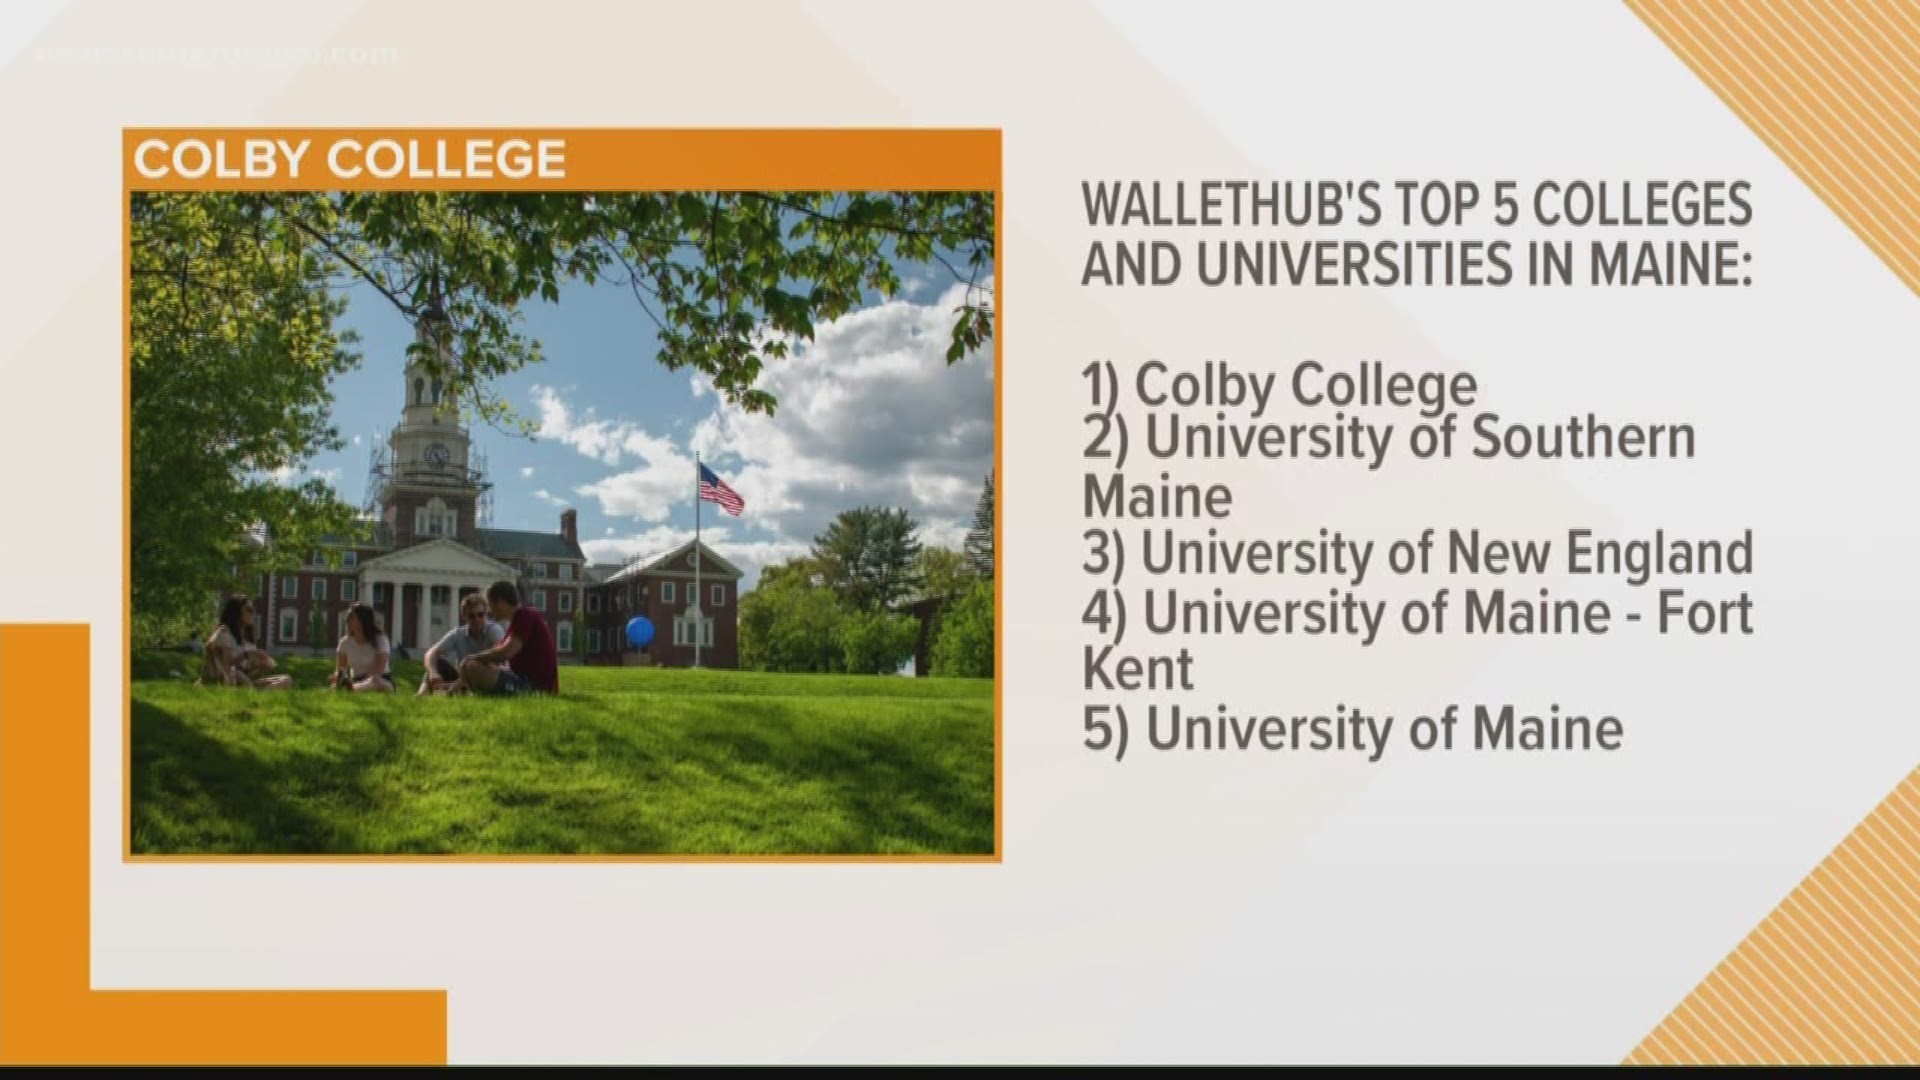 As the stress begins to mount for college applications, WalletHub came out with its 2020 best colleges and universities ranking.